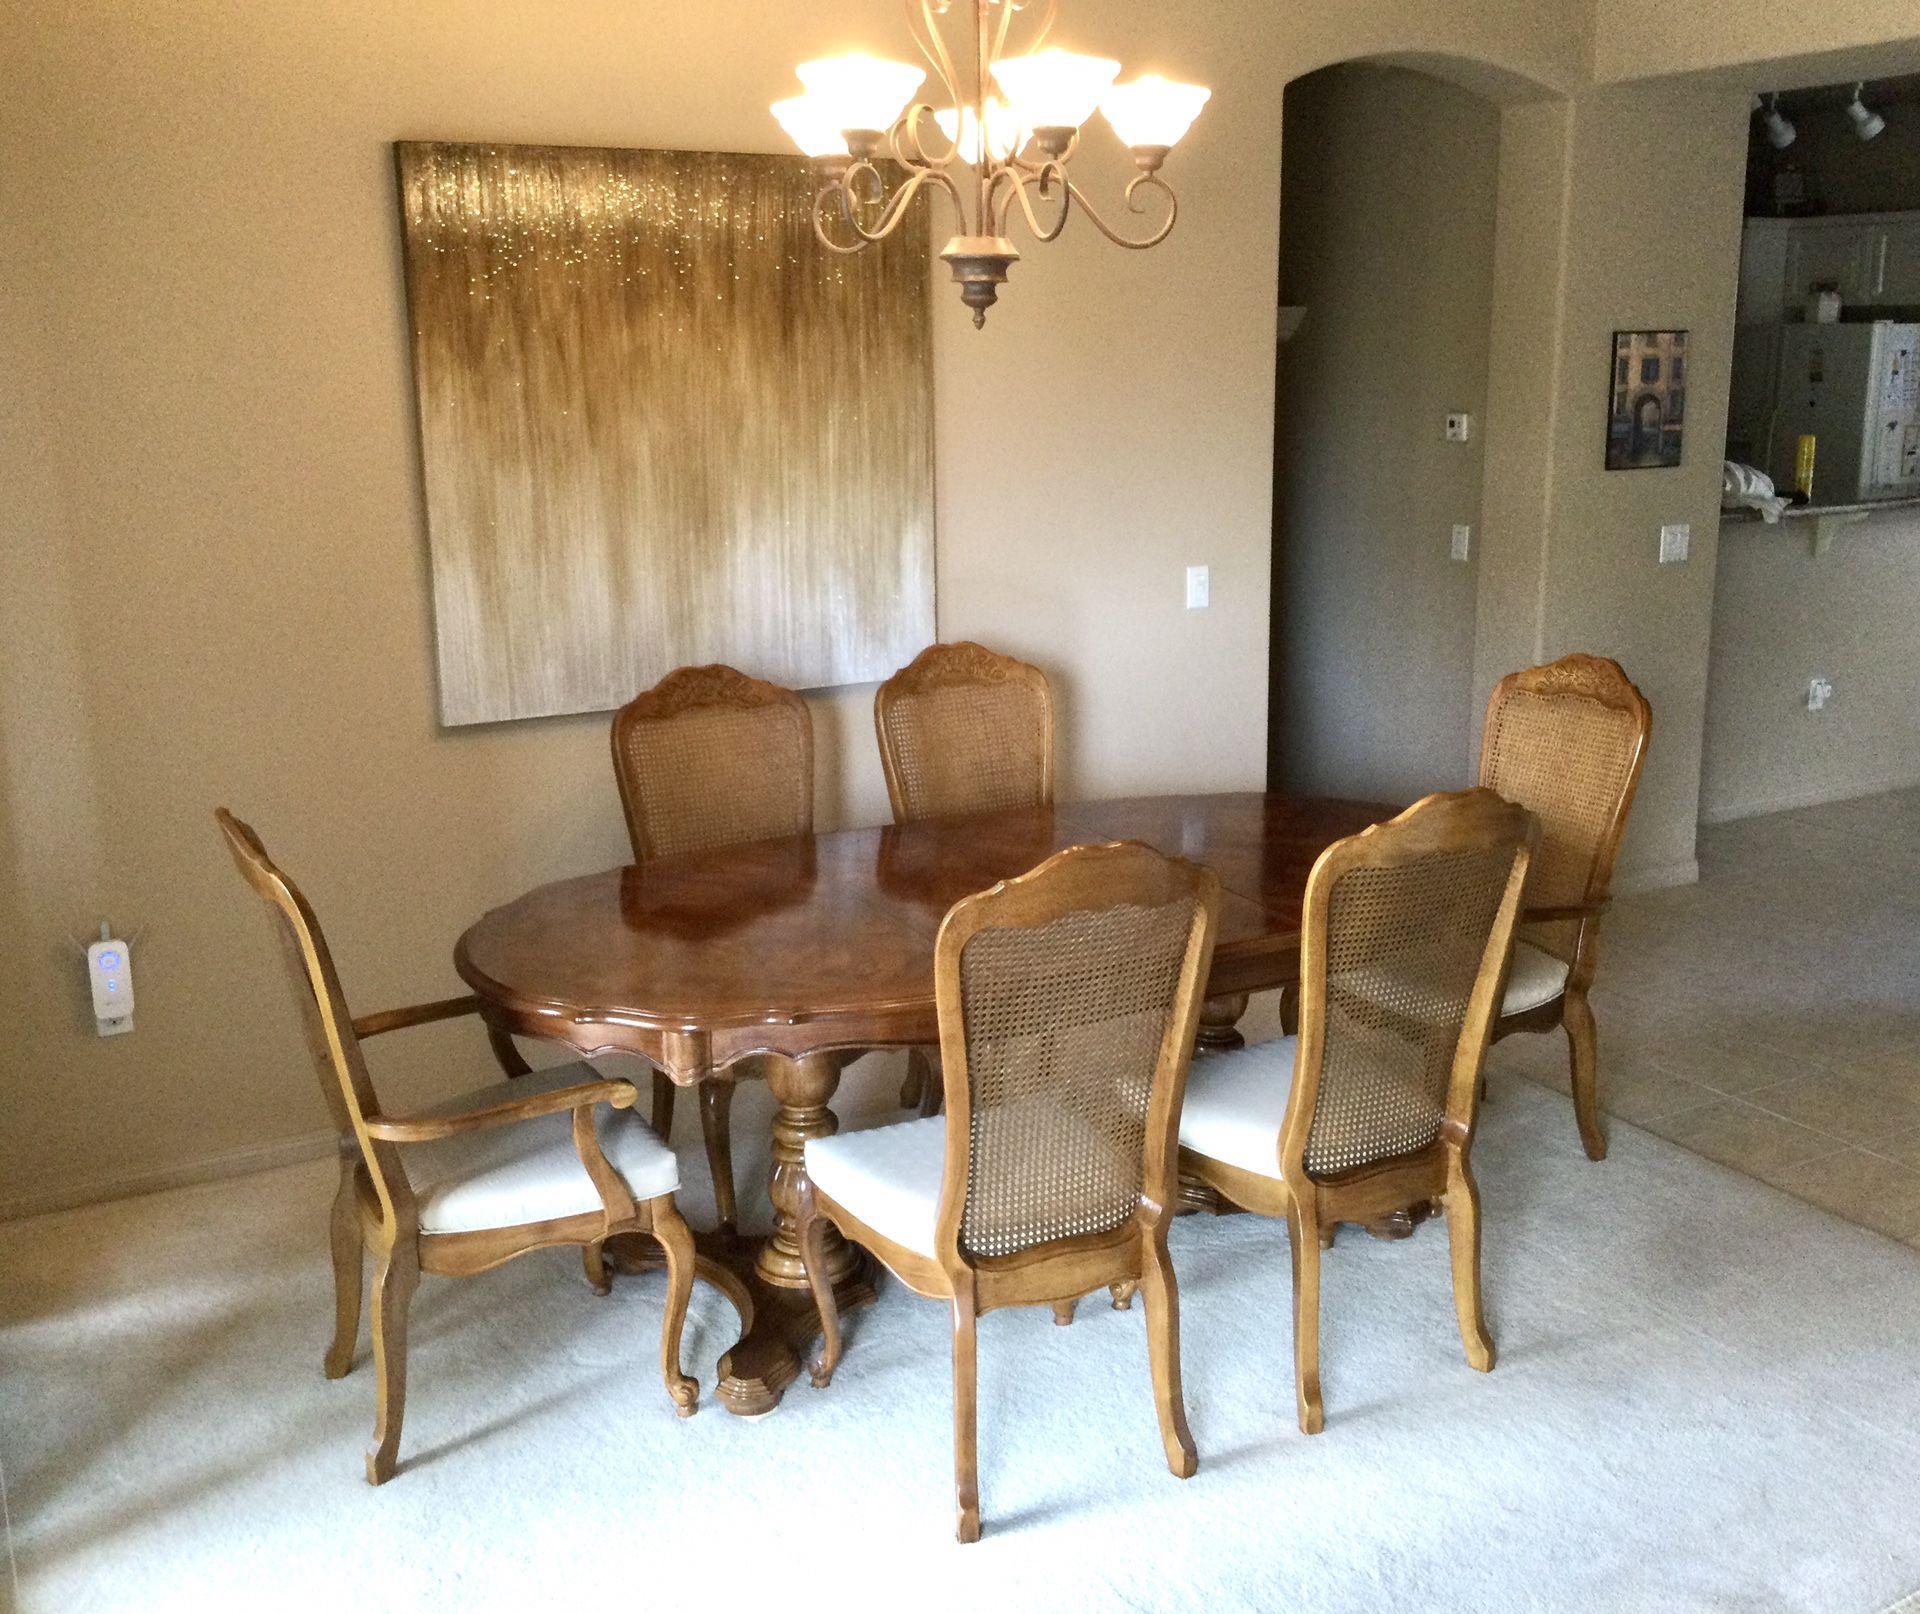 Spanish Provincial Dining Room Set, Including Table, 6 Chairs, Cabinet/Hutch Combination w/glass windows, doors, shelves